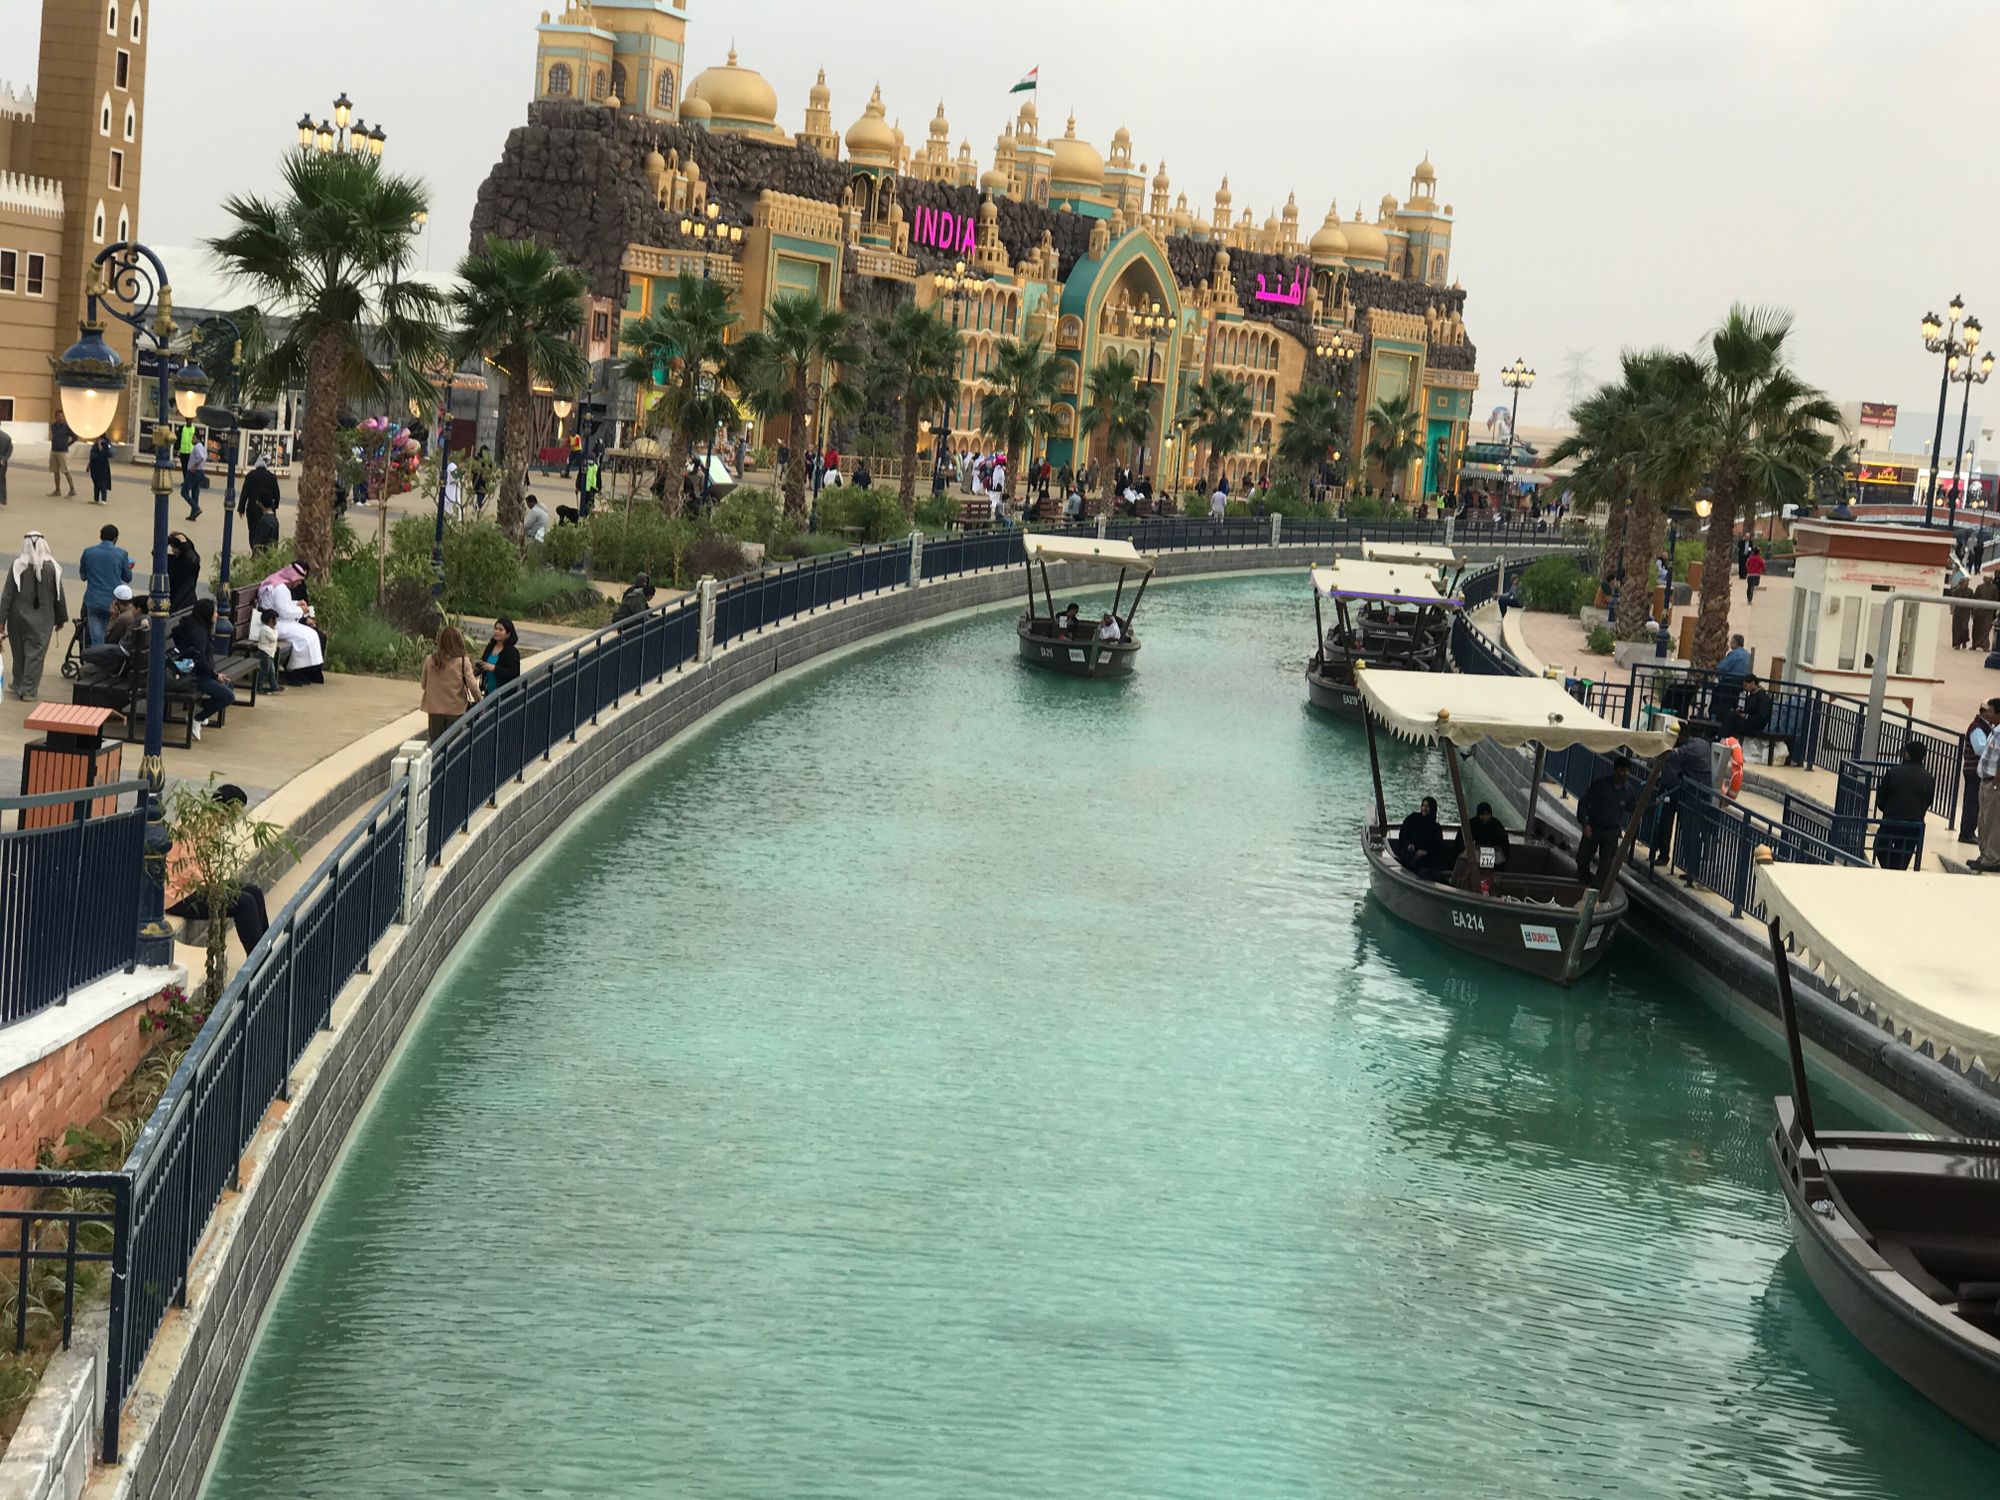 An abra ride and the India Pavilion